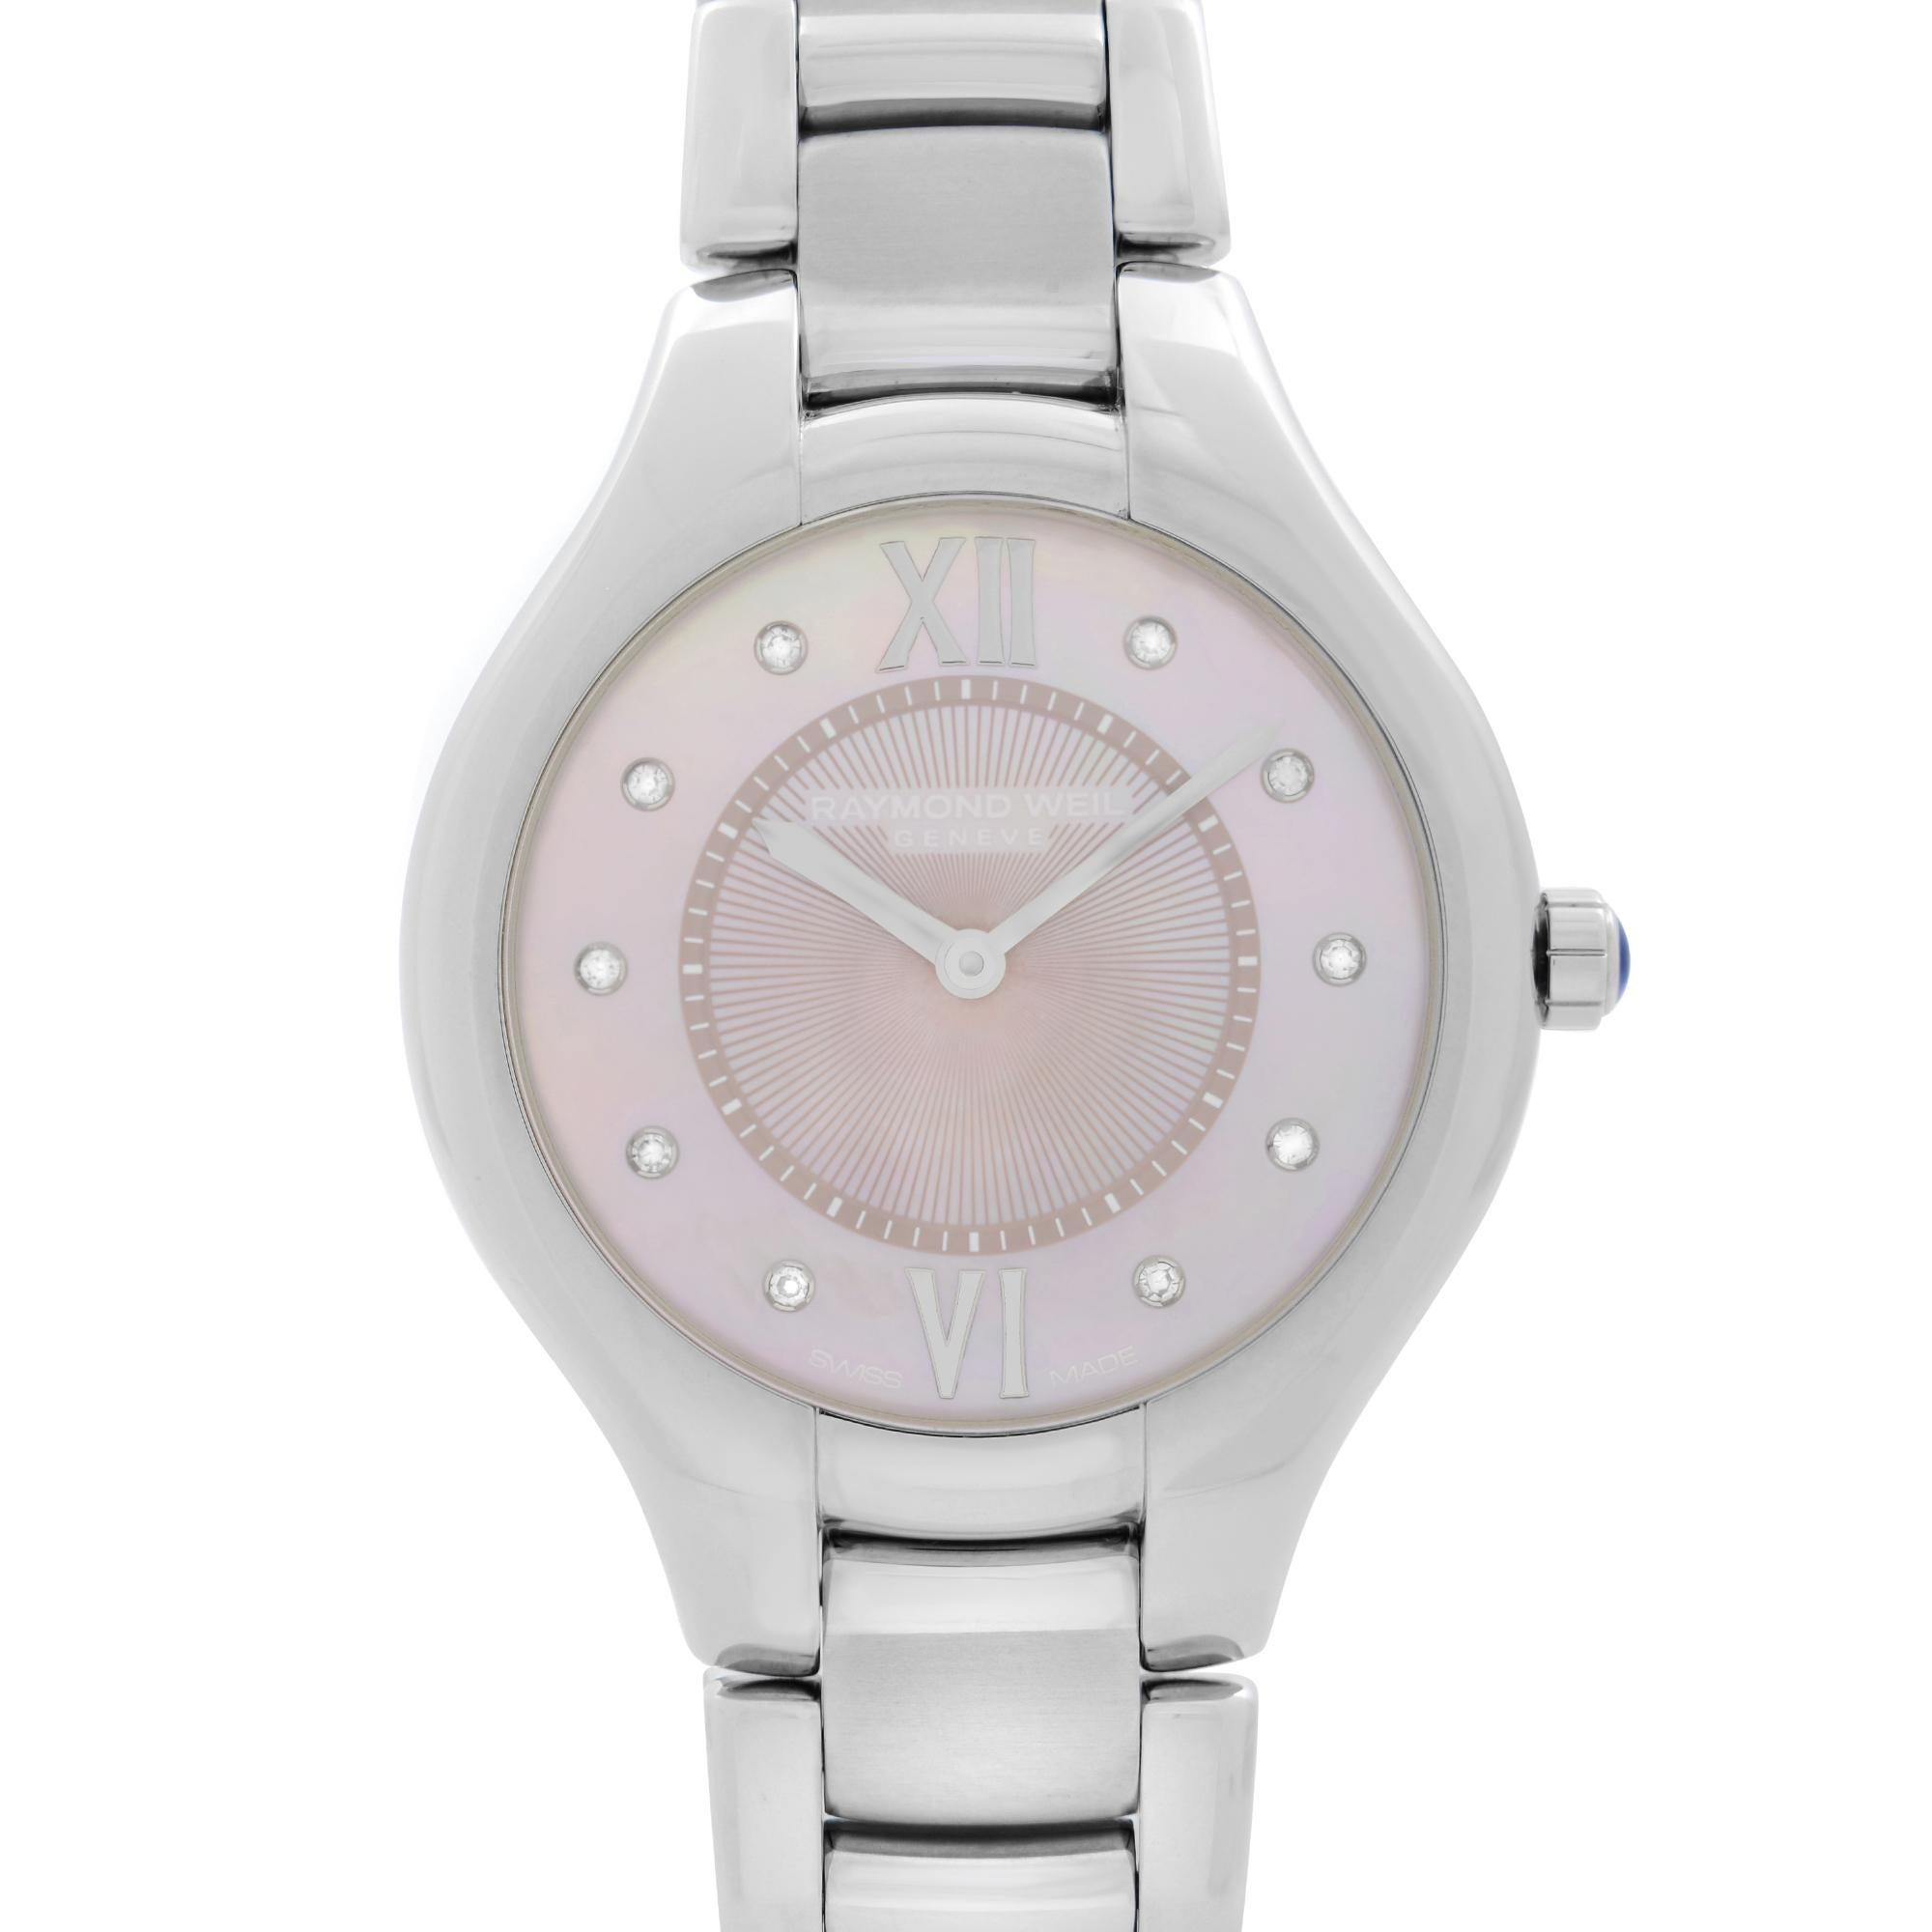 Store Display Model Raymond Weil Noemia Steel Diamond Pink MOP Dial Quartz Ladies Watch 5132-ST-00986. This Beautiful Timepiece Features: Stainless Steel Case and Bracelet, Fixed Stainless Steel Bezel, Pink Mother-of-Pearl Dial with Silver-Tone